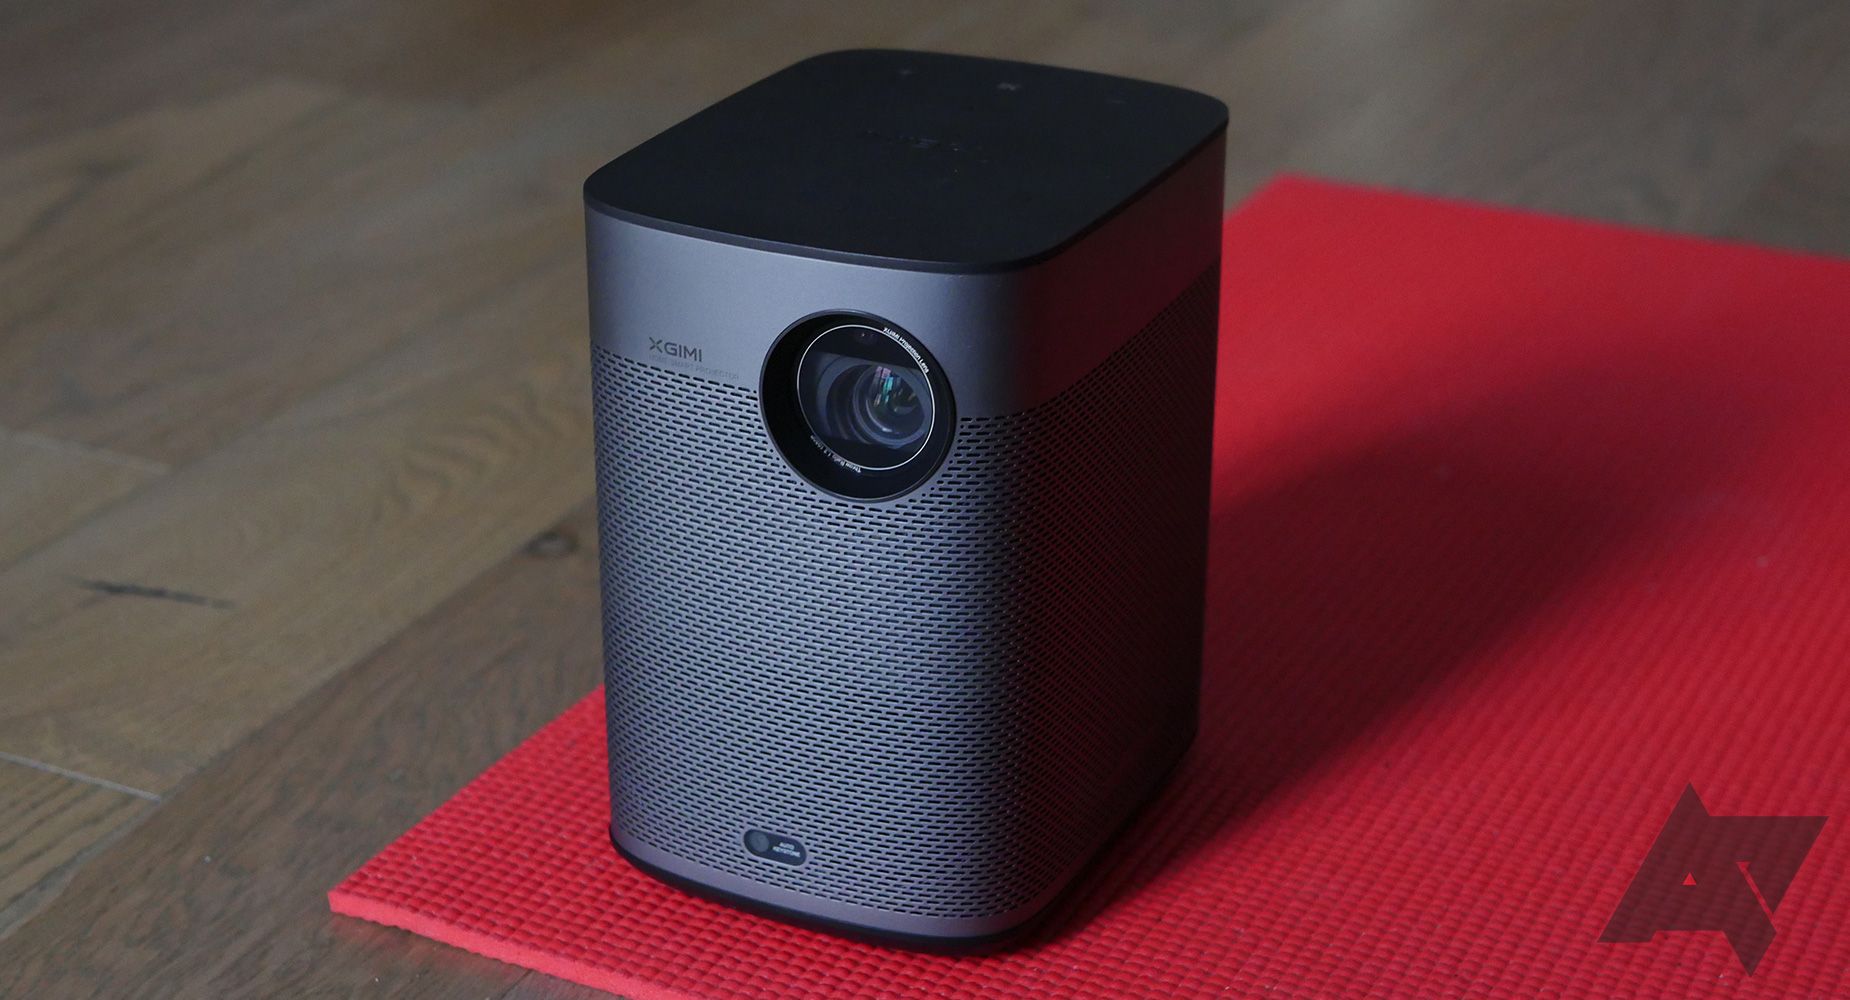 Xgimi Halo+ review: A portable projector's got no business looking 